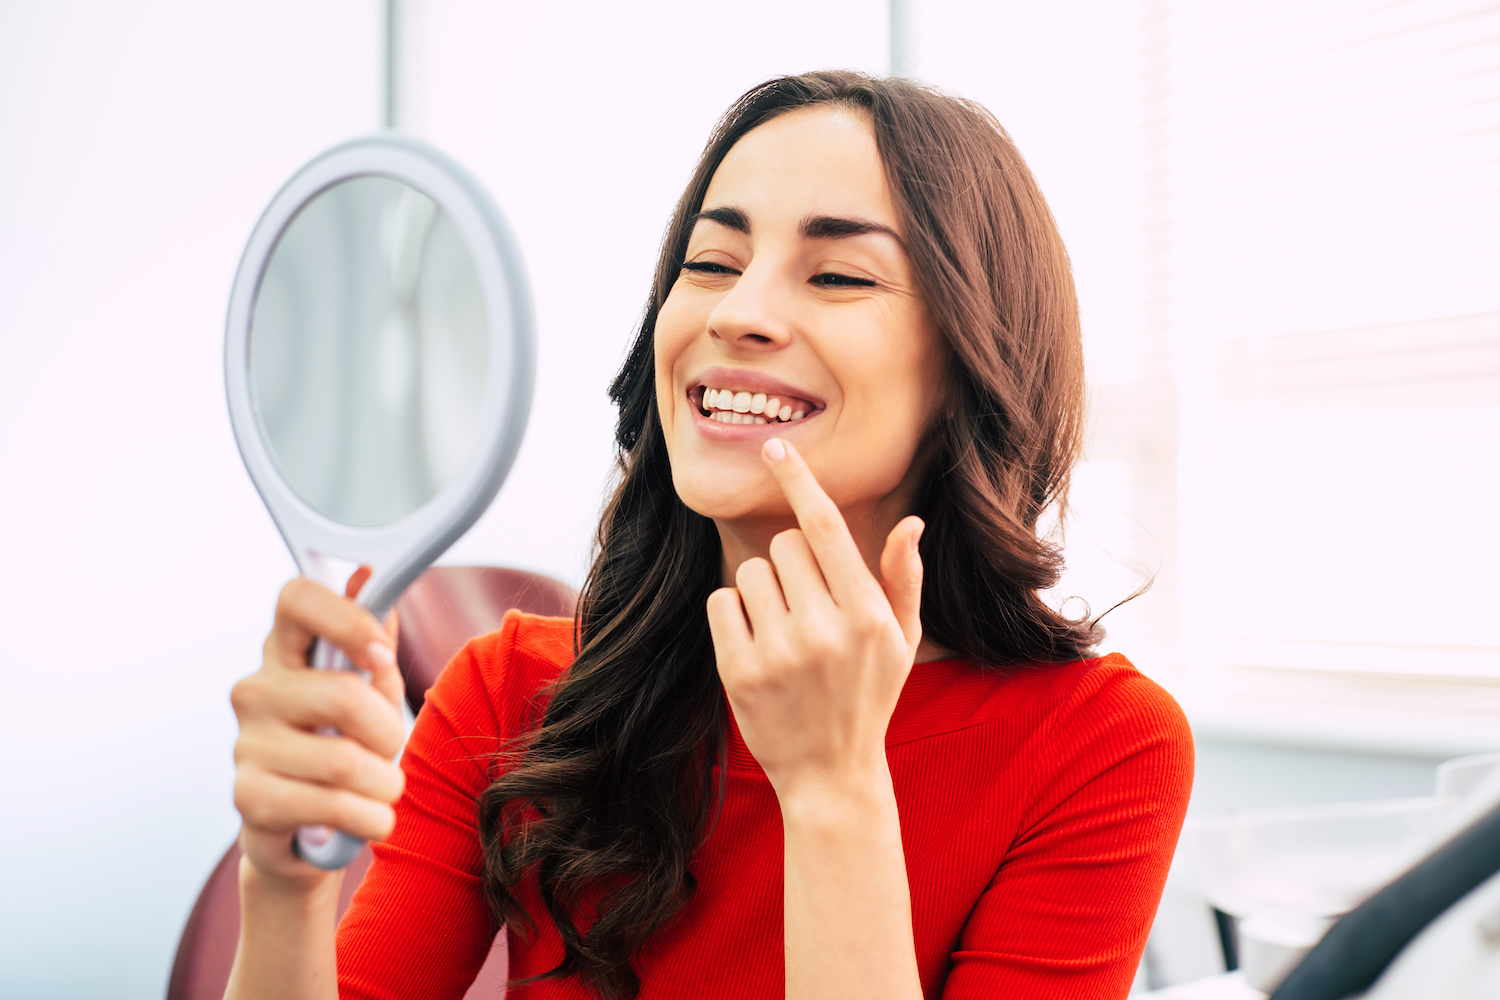 brunette woman in a red blouse smiles at her teeth in a handheld mirror after a smile makeover